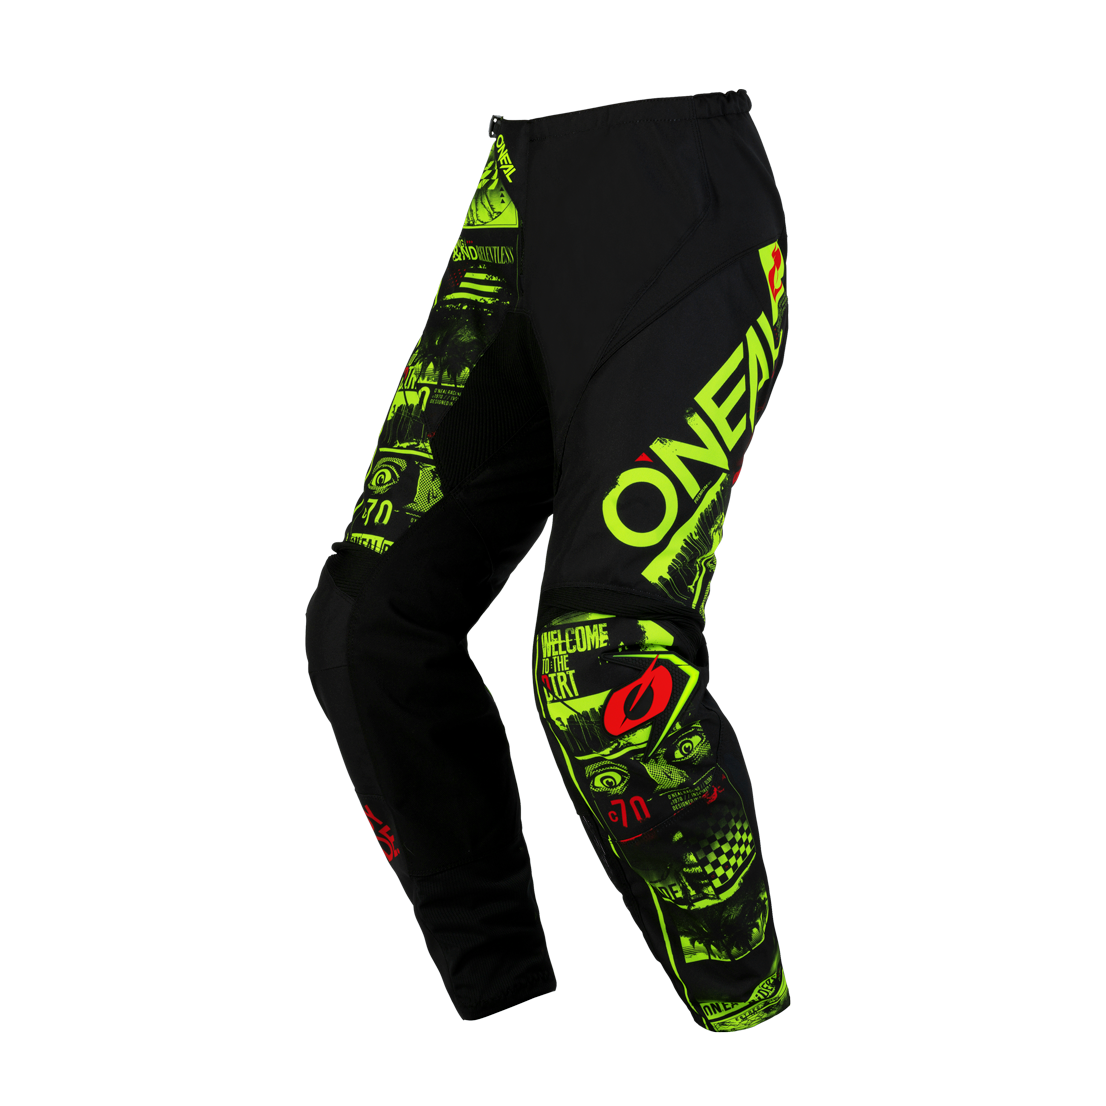 O'NEAL Element Attack V.23 Pants Black/Neon